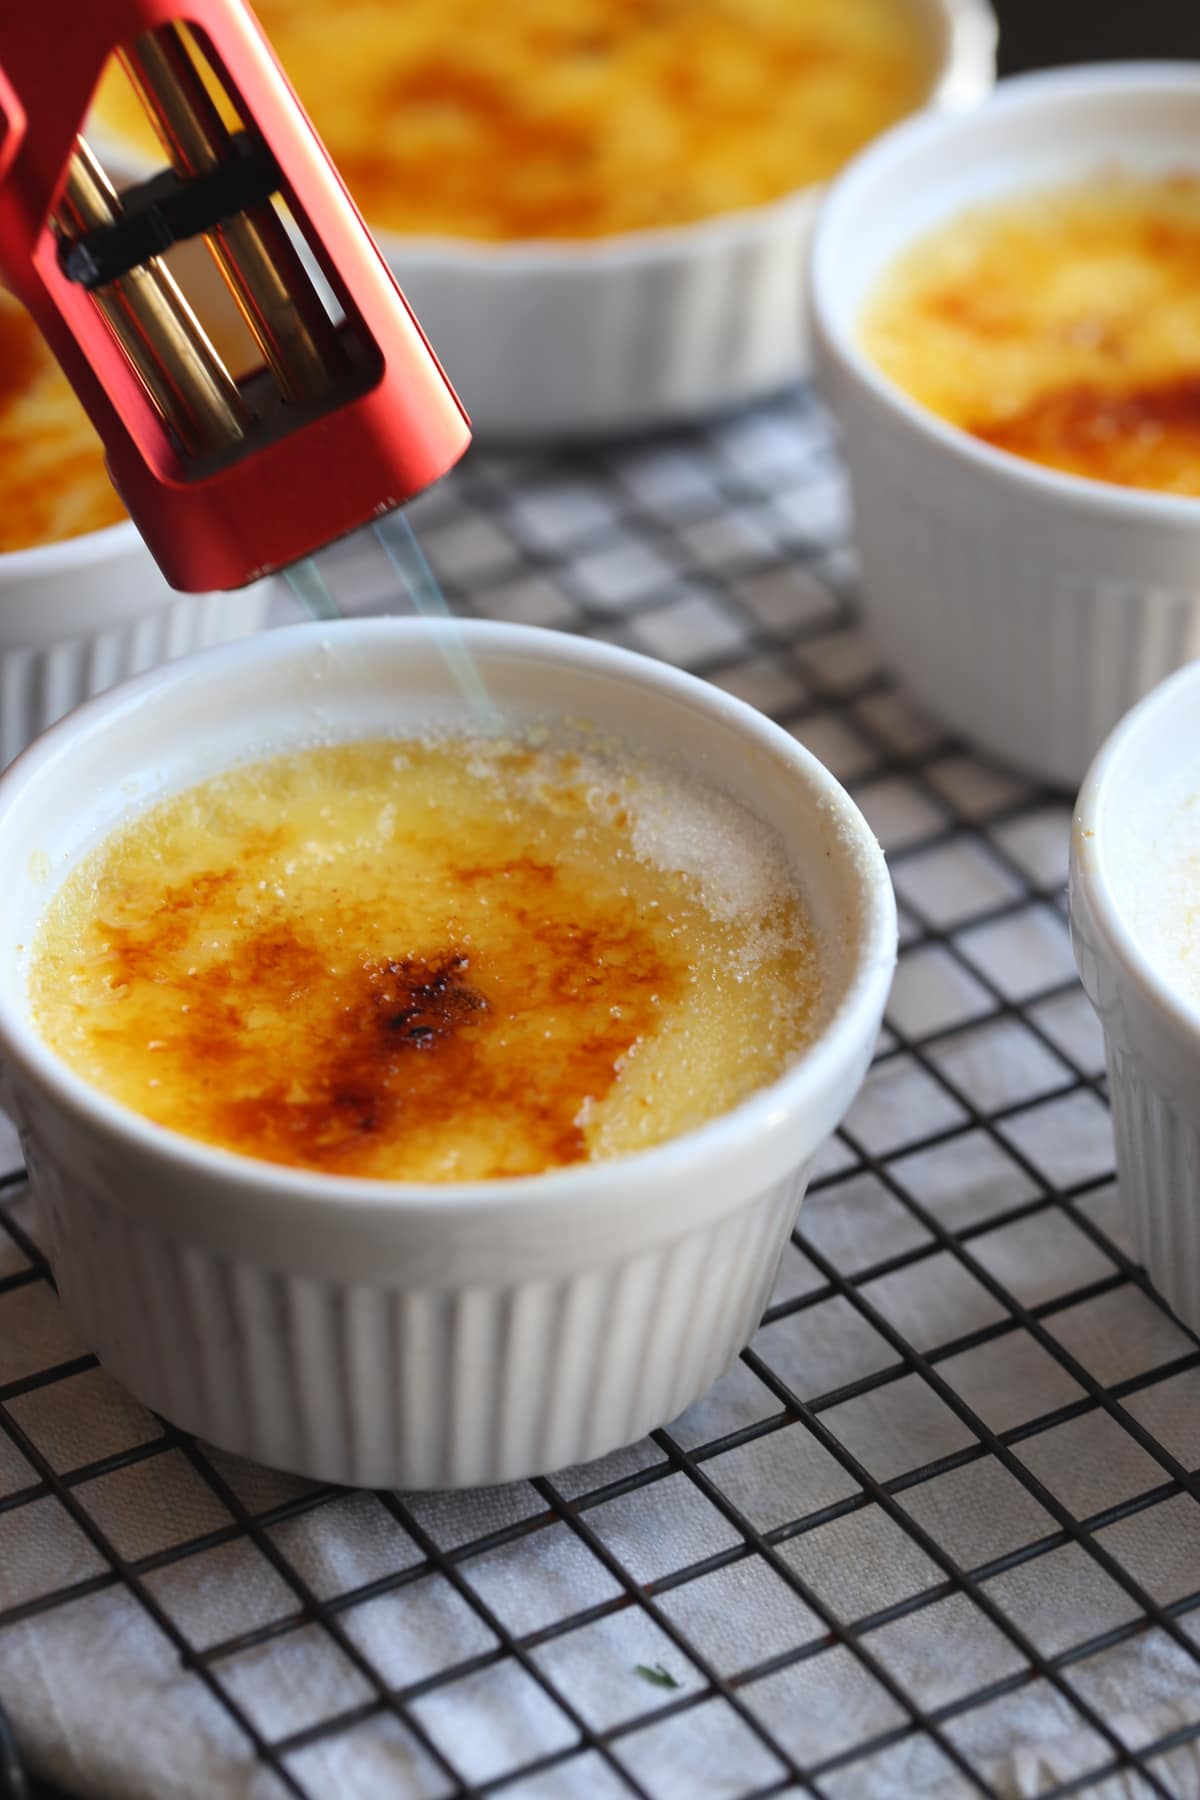 using a kitchen torch to brûlée the sugar, melting it and caramelizing so it forms a crispy sugar top